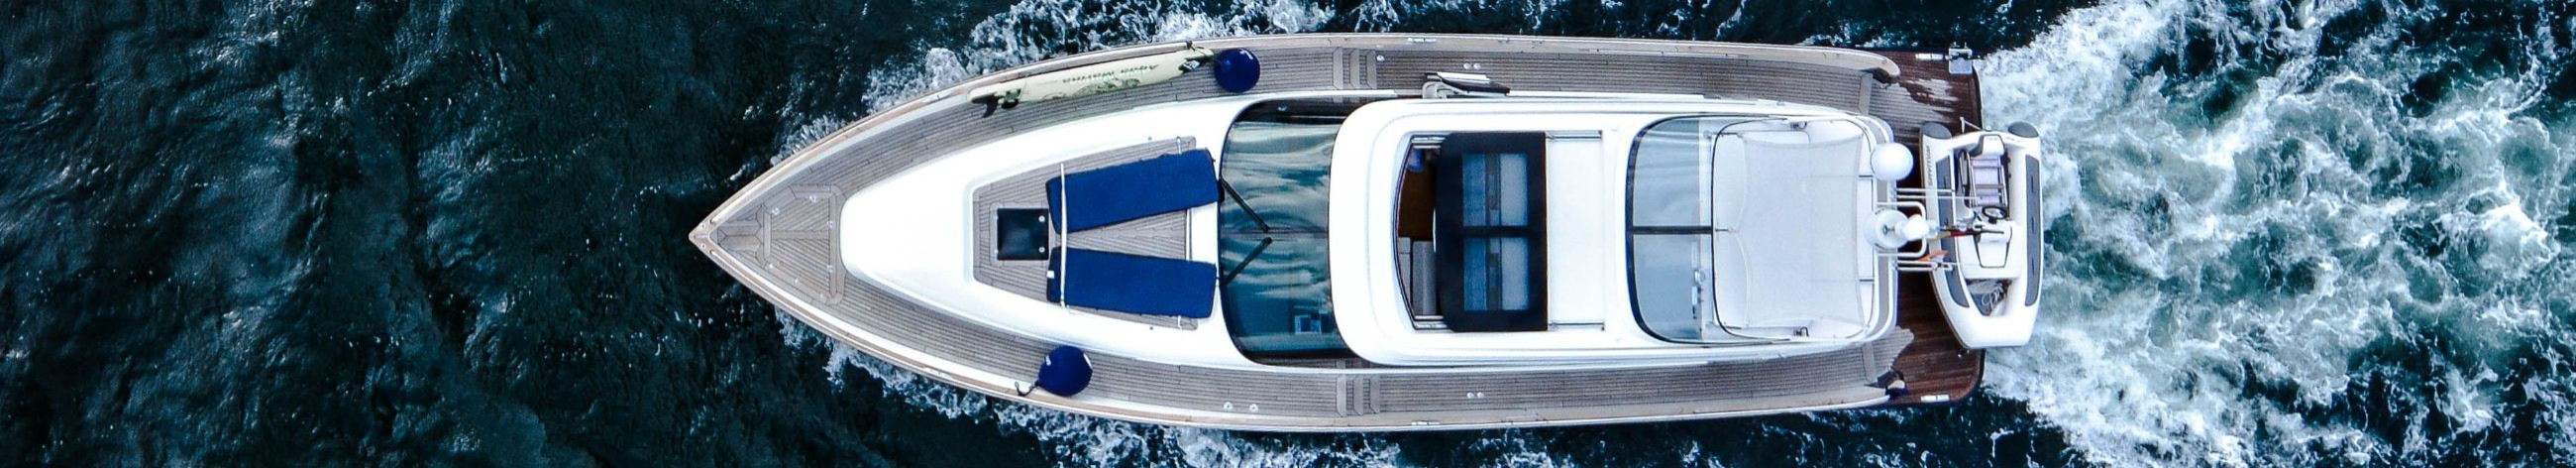 We provide comprehensive cleaning, maintenance, and polishing services for boats and yachts.